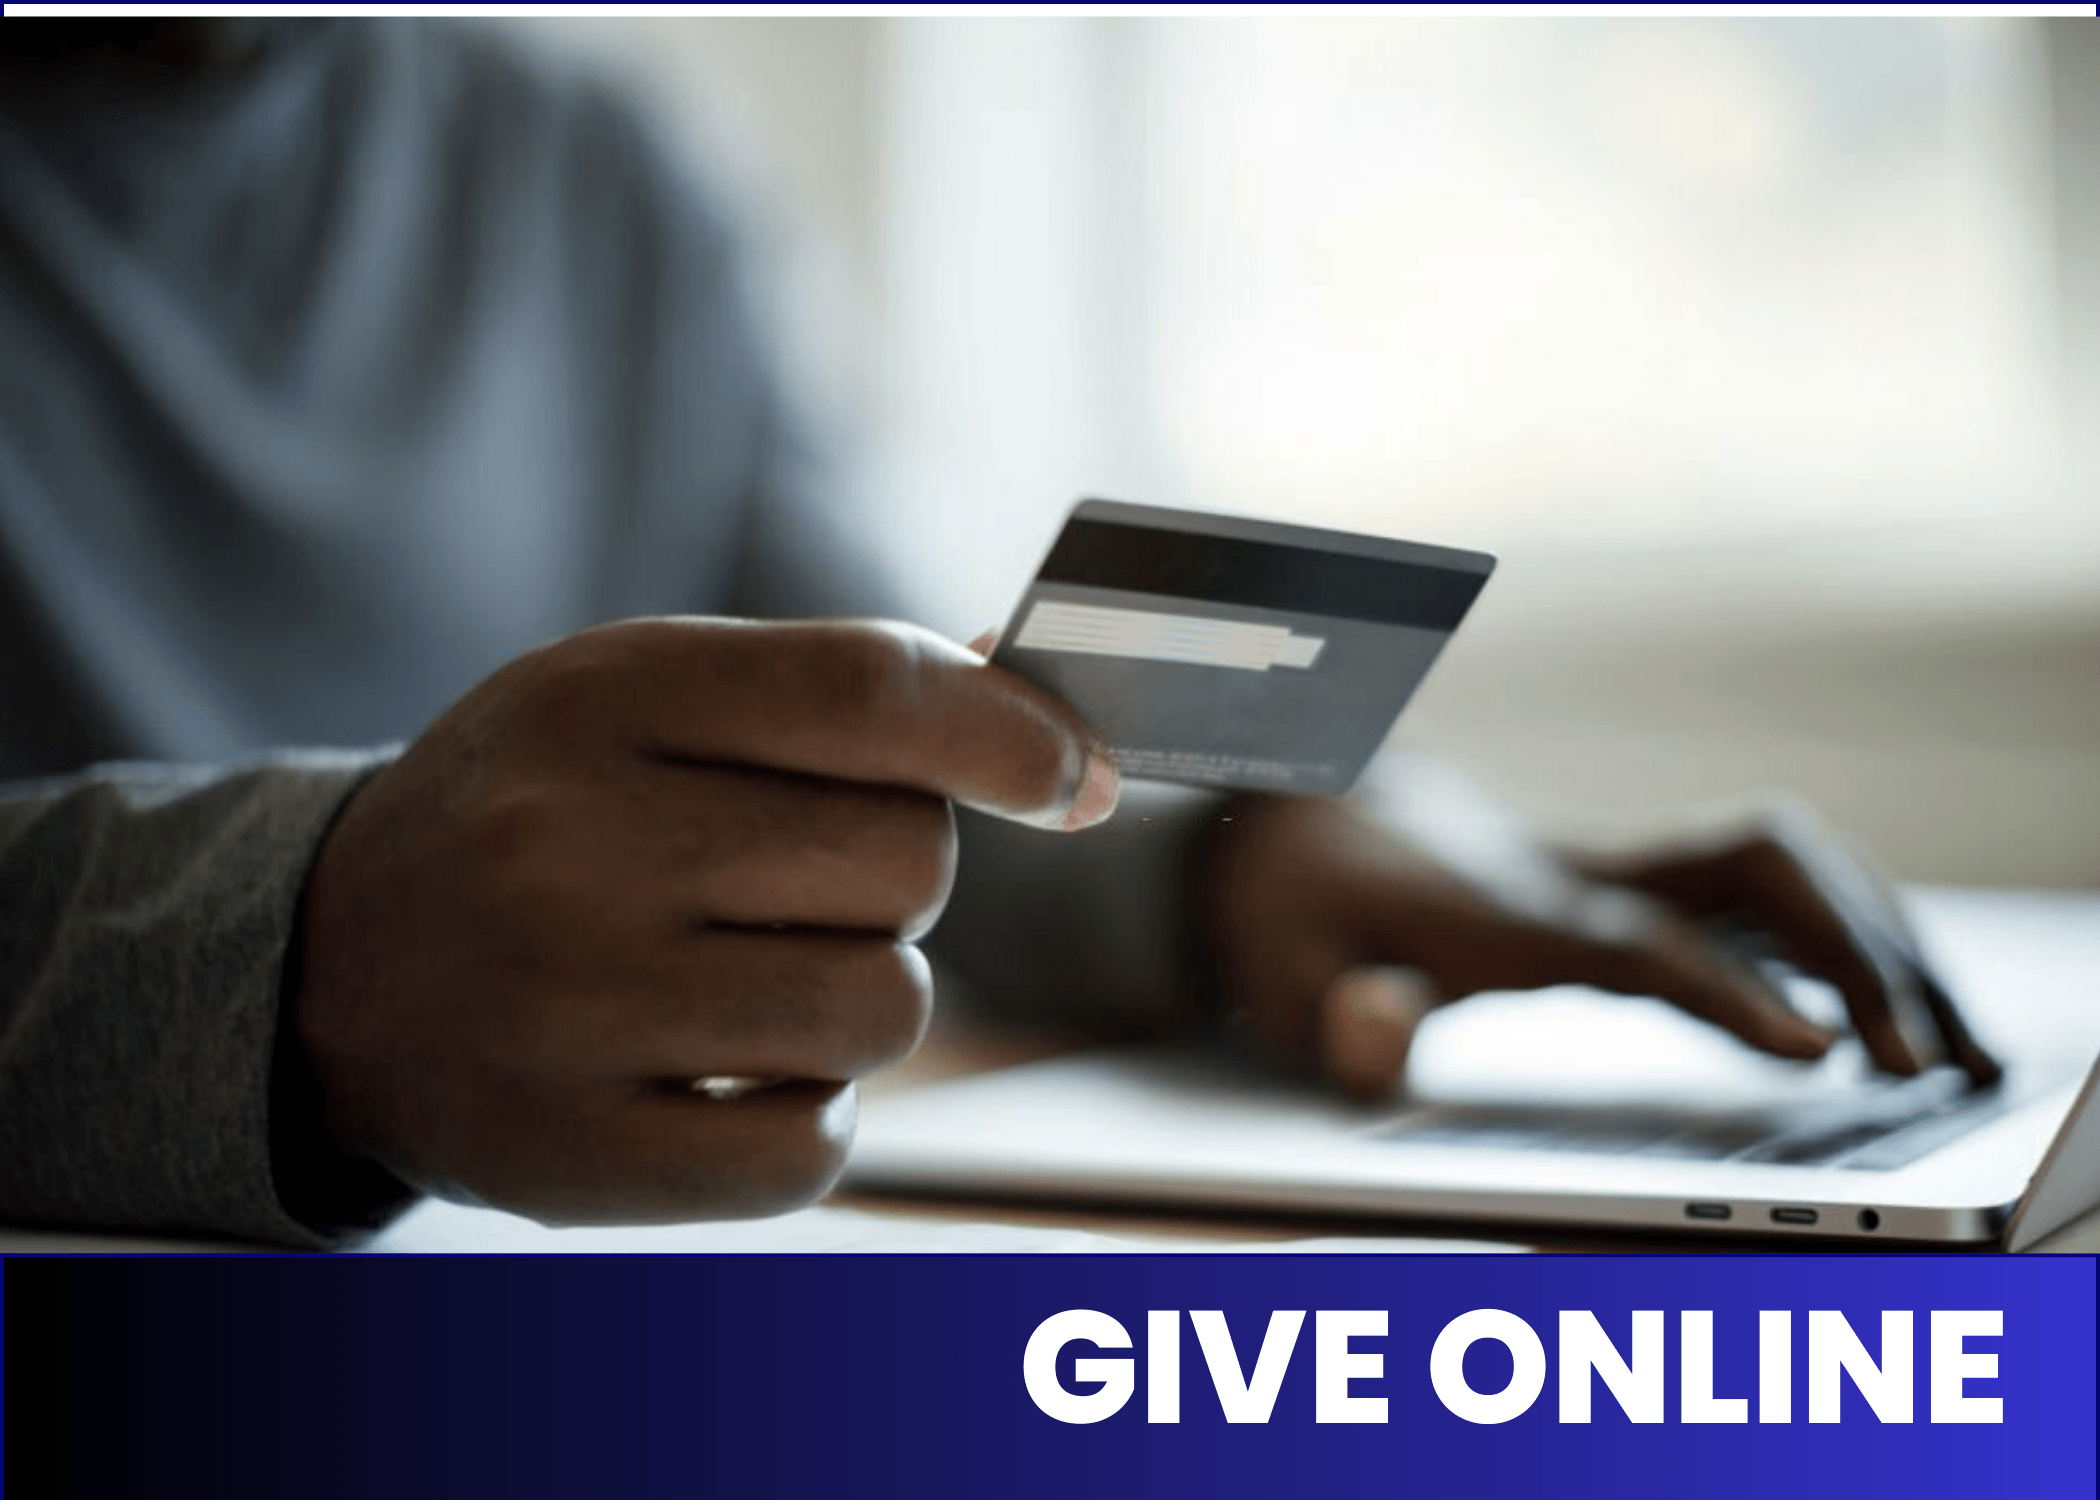 Give Online